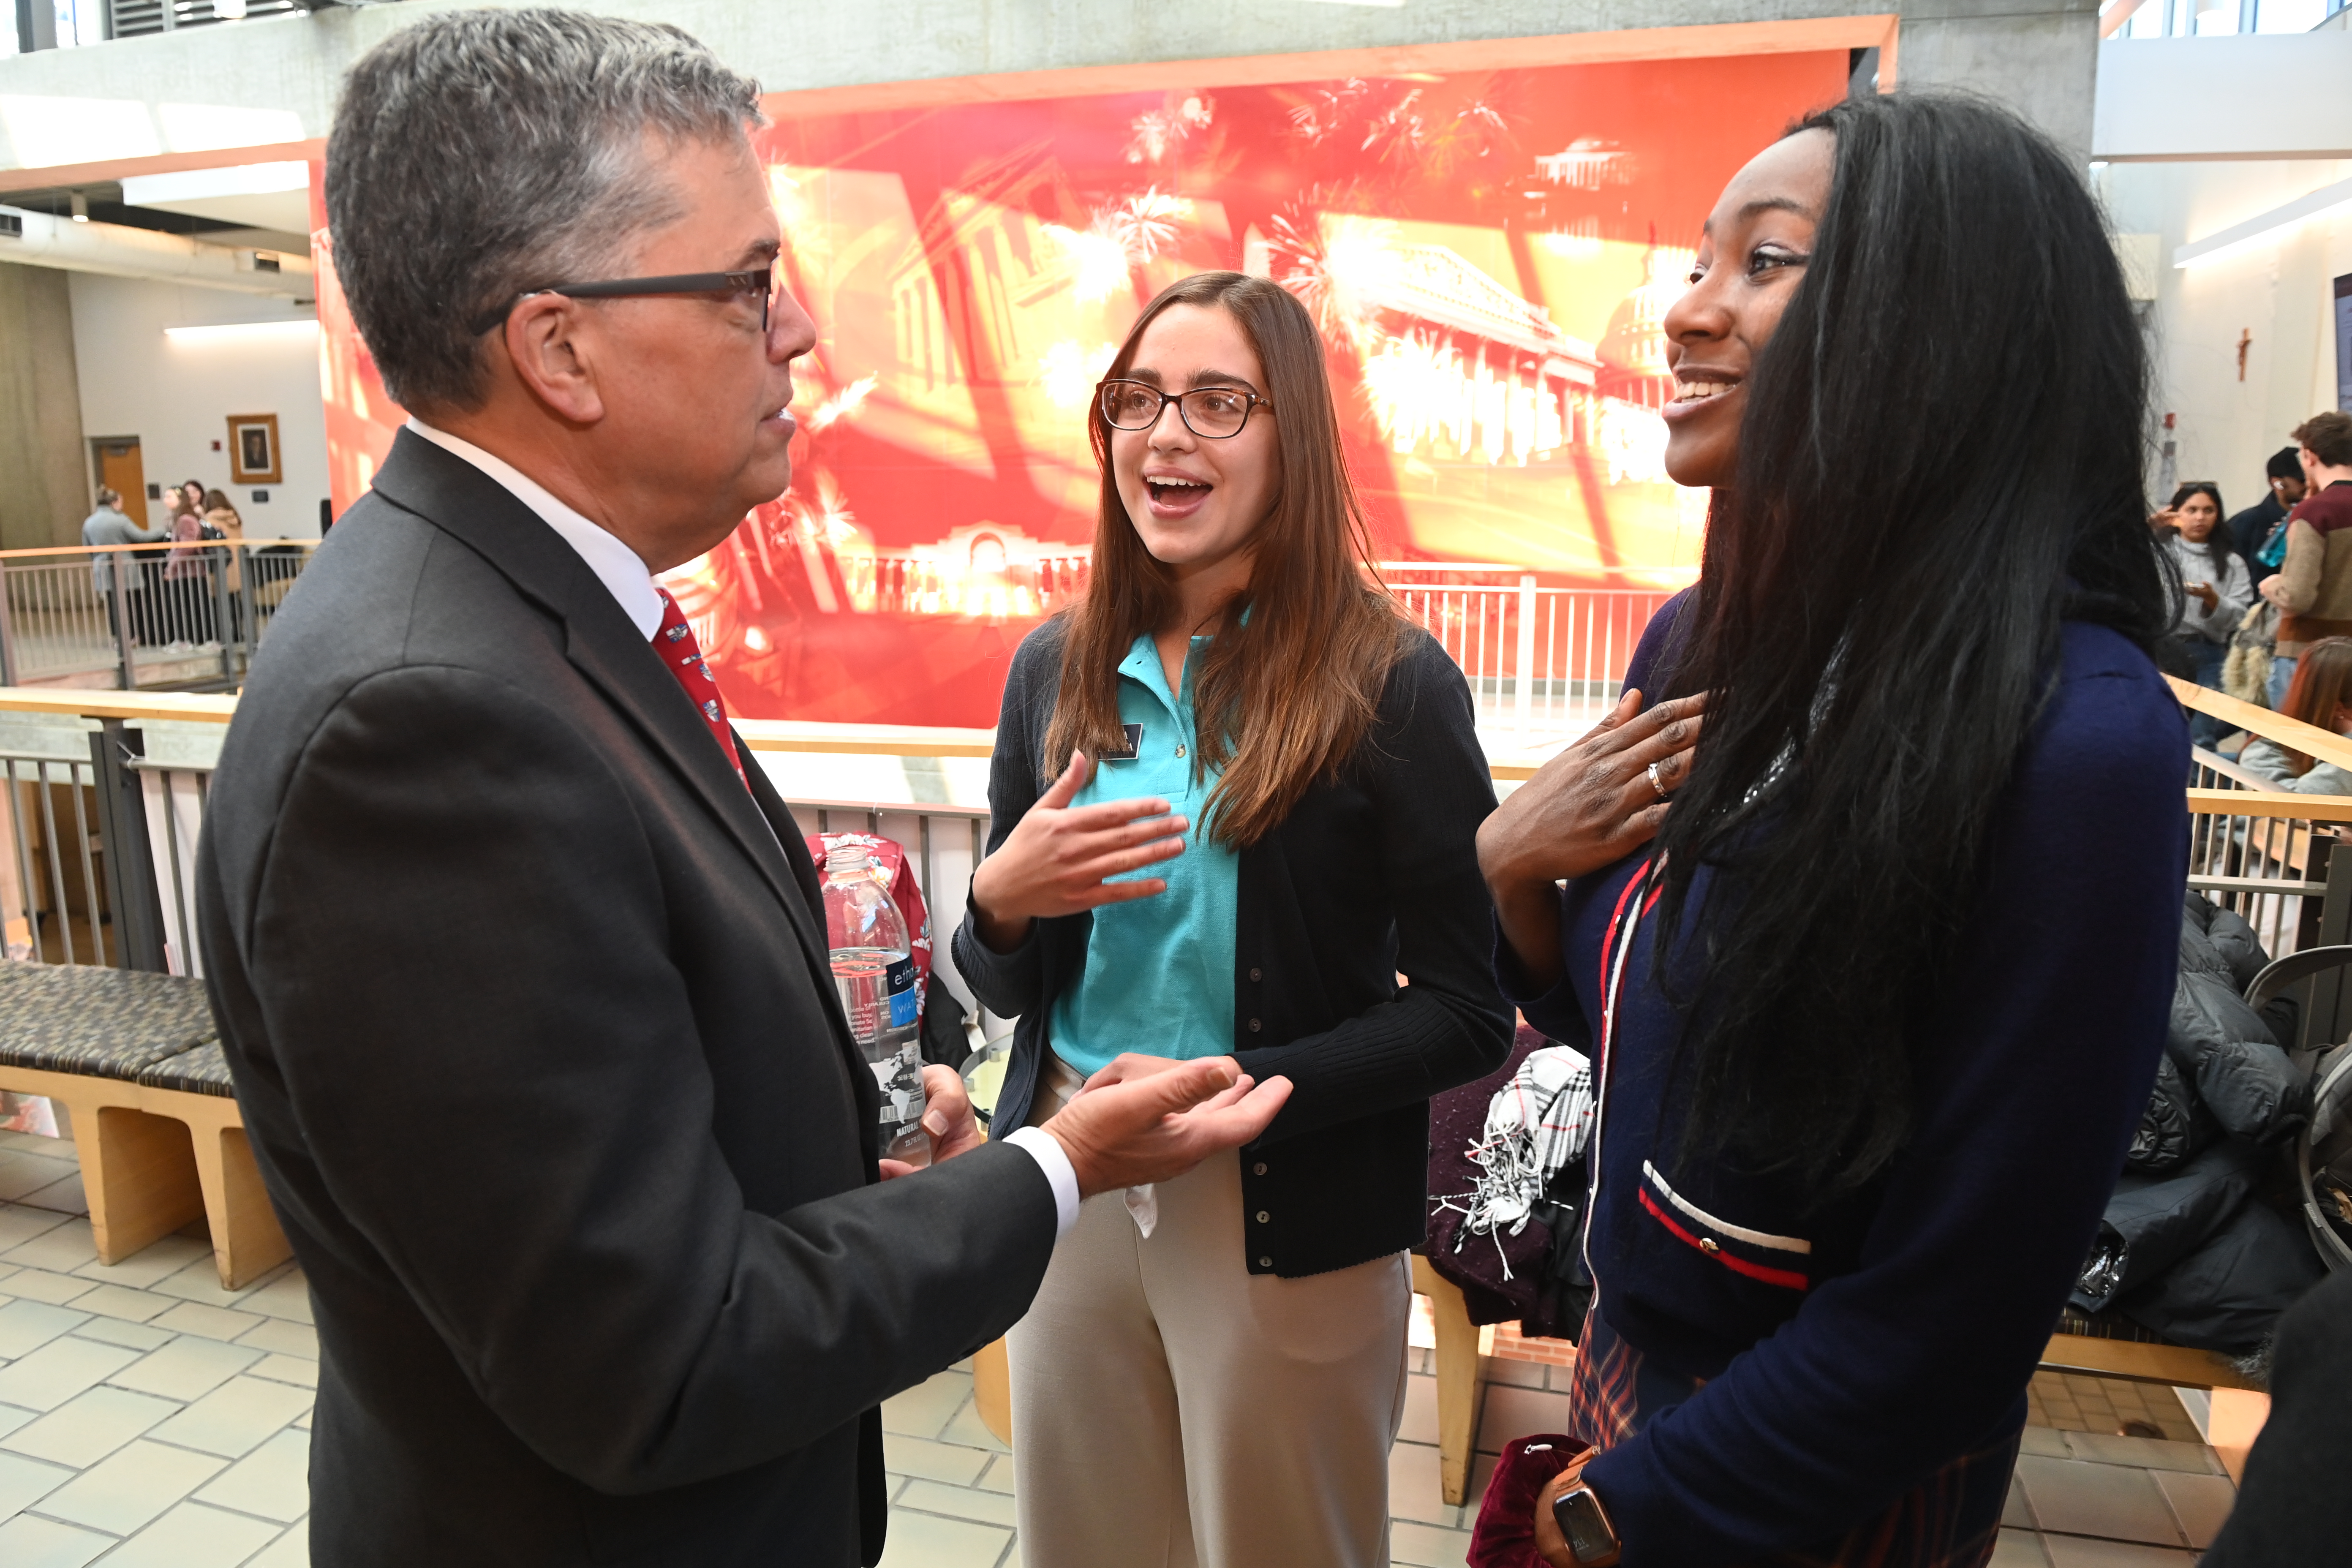 Peter Kilpatrick laughs with students on campus on March 29, 2022.